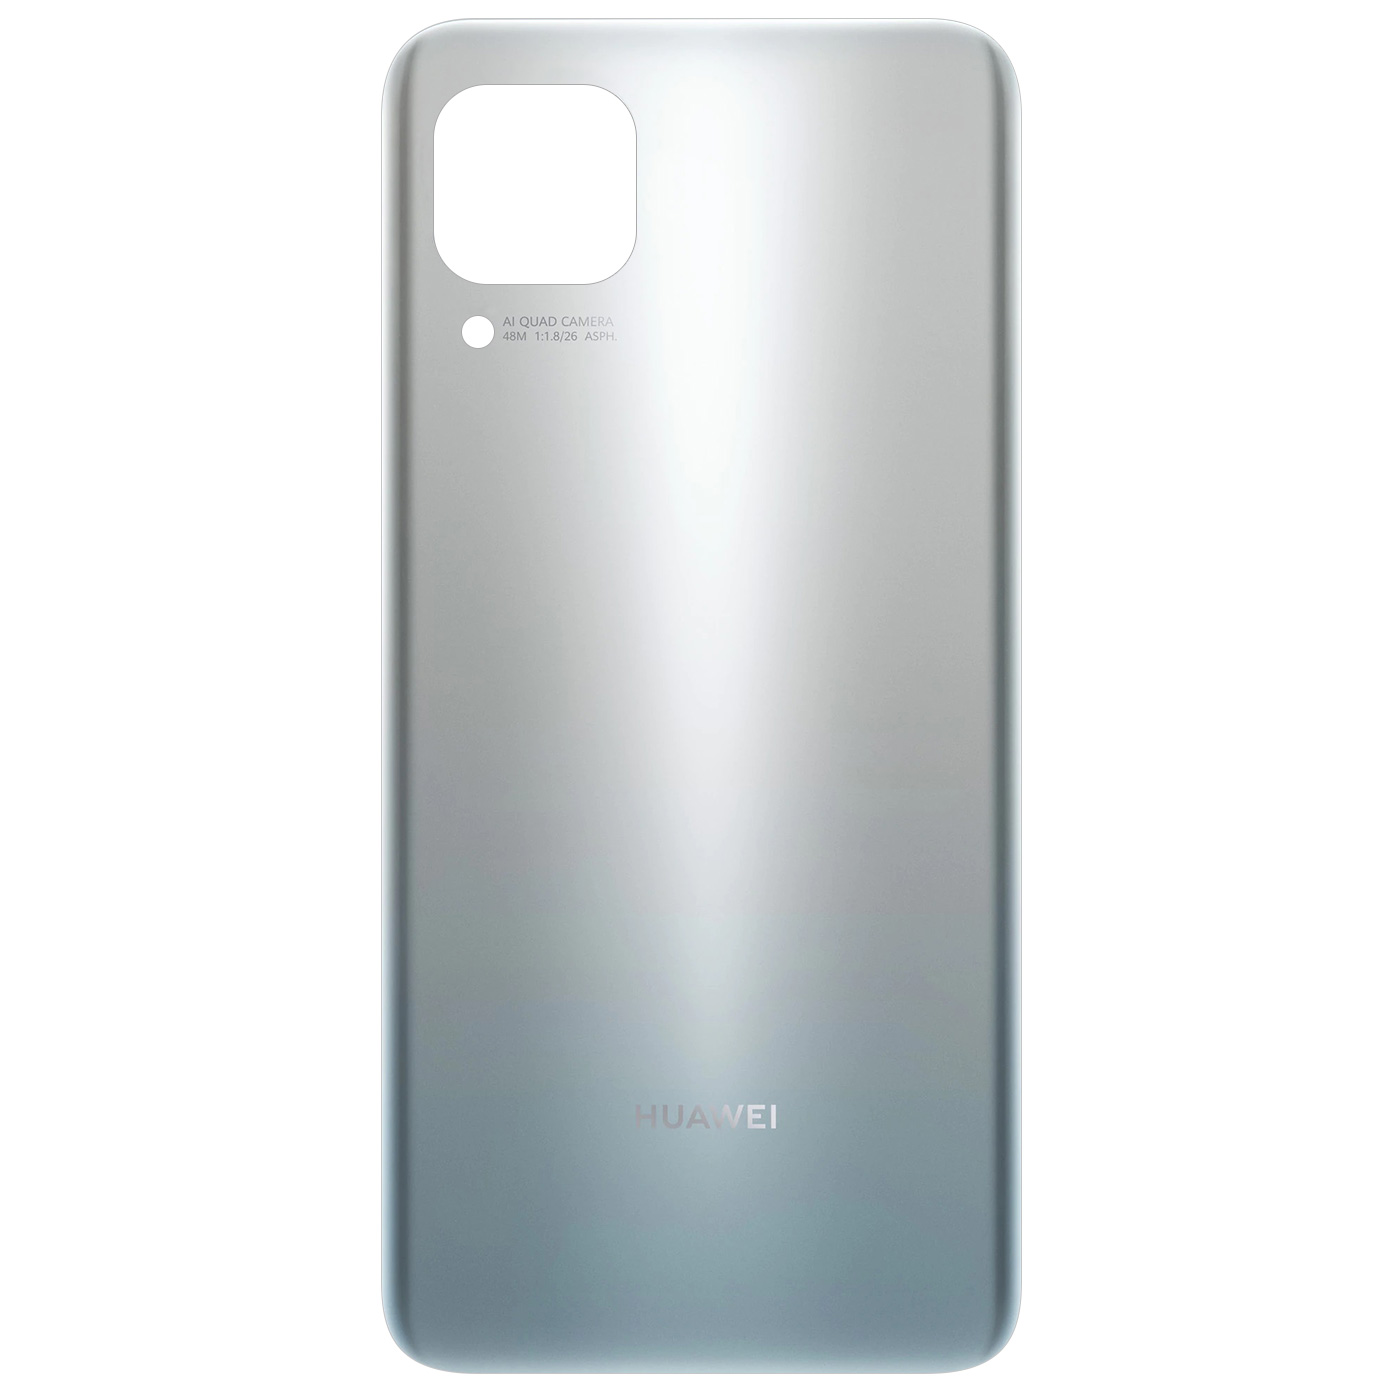 battery-cover-for-huawei-huawei-p40-lite-skyline-gray-02353uvq-